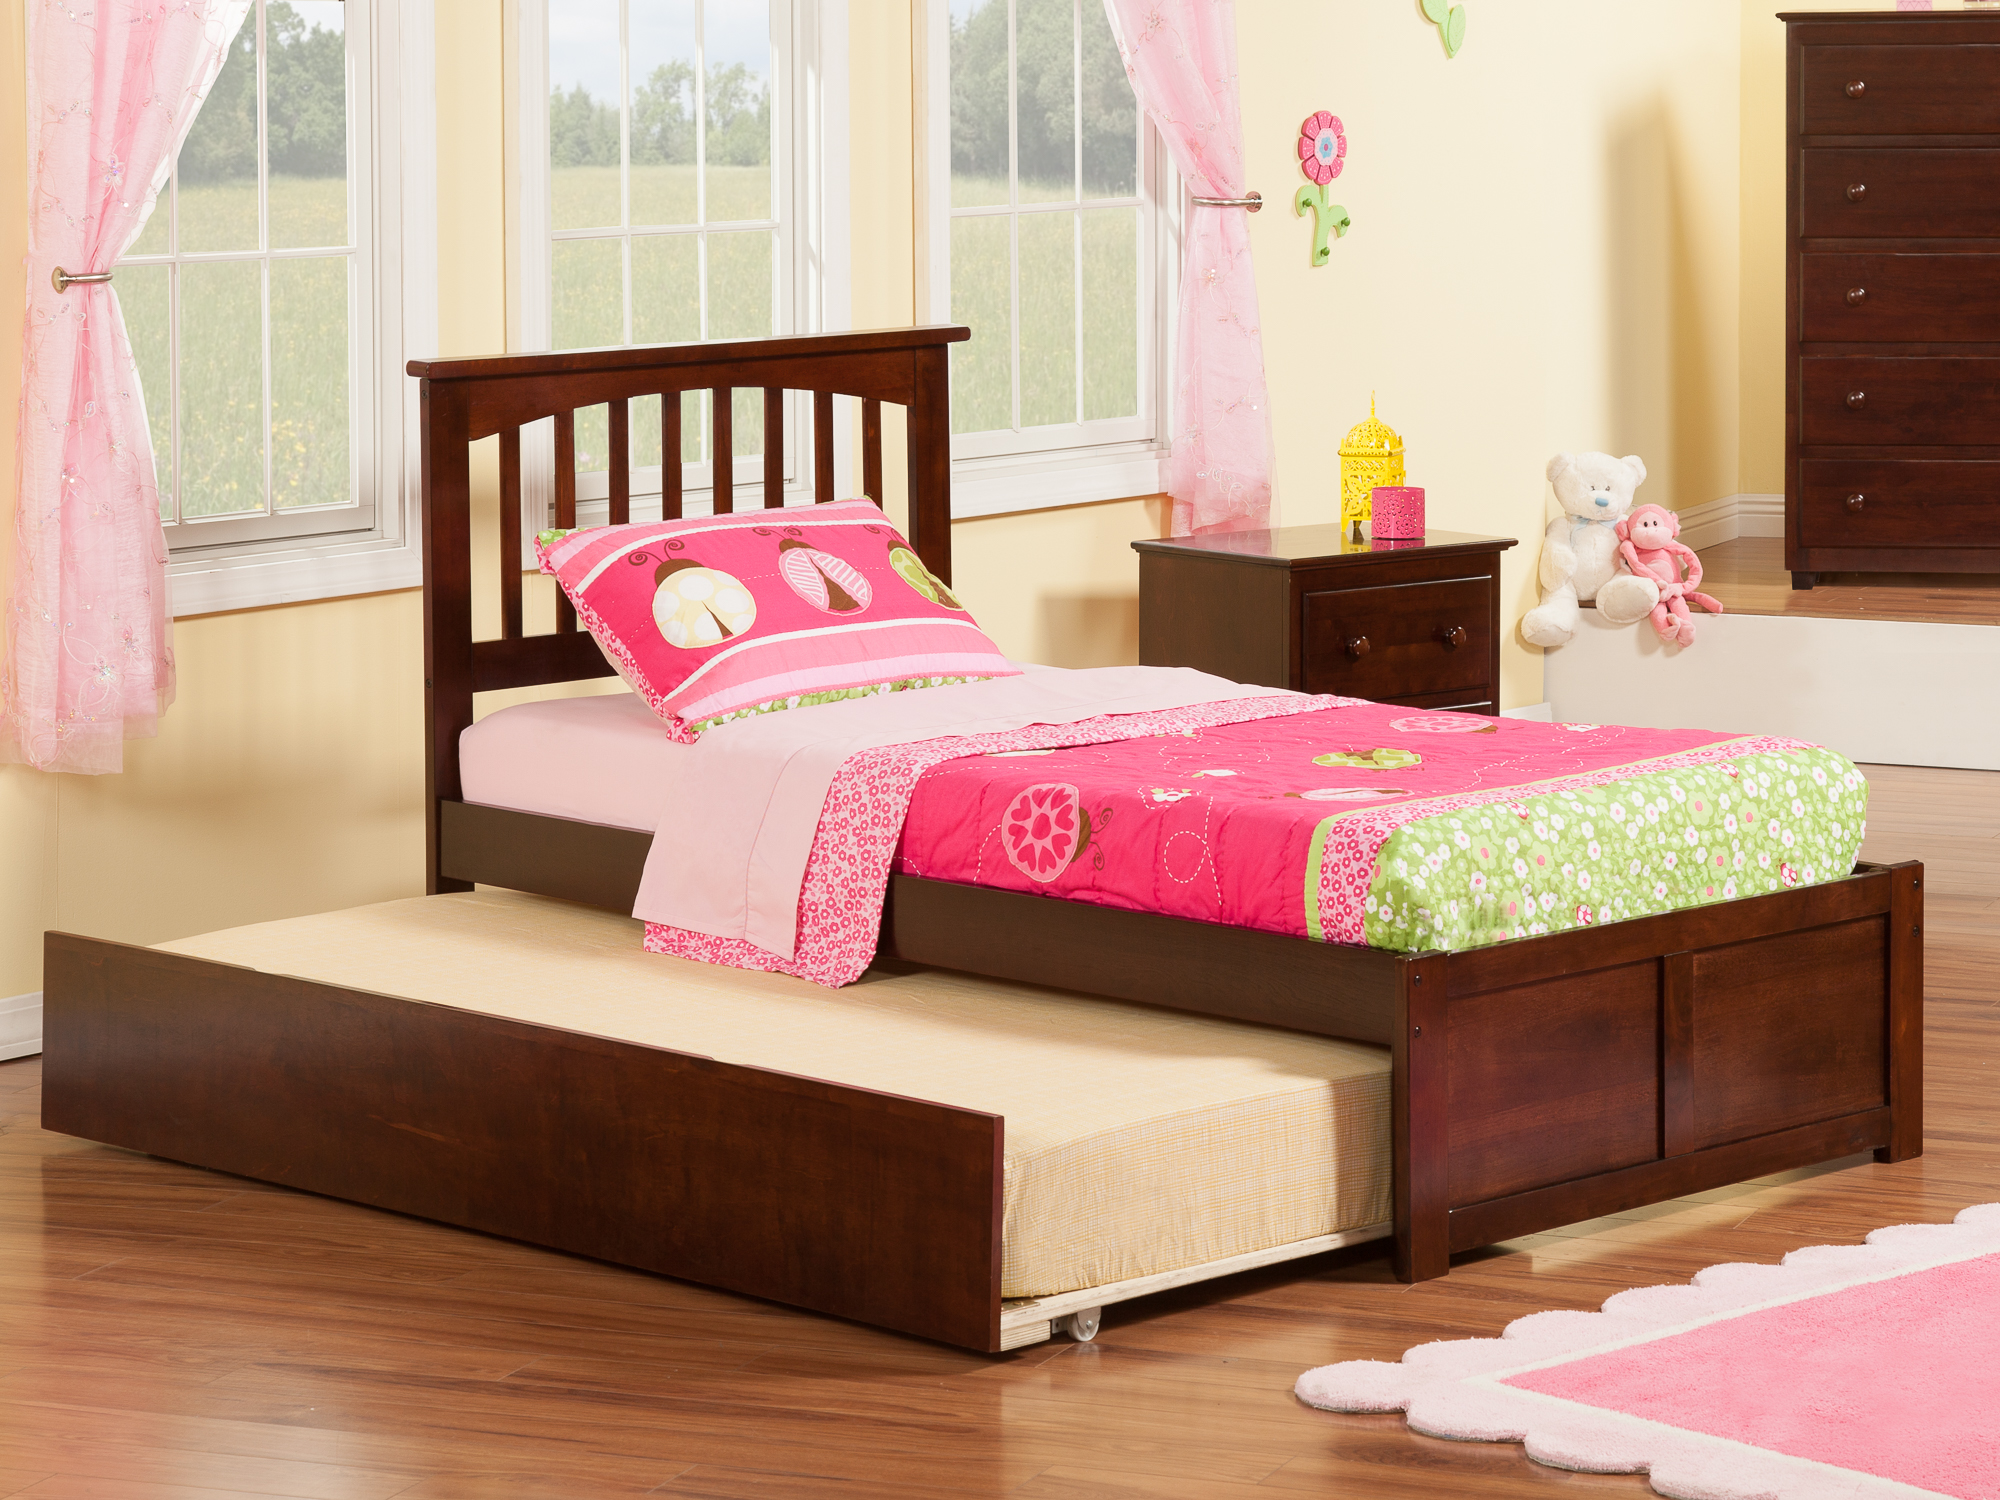 Mission Platform Bed with Flat Panel Foot Board and Twin Size Urban Trundle Bed in, Multiple Colors and Sizes - image 2 of 7